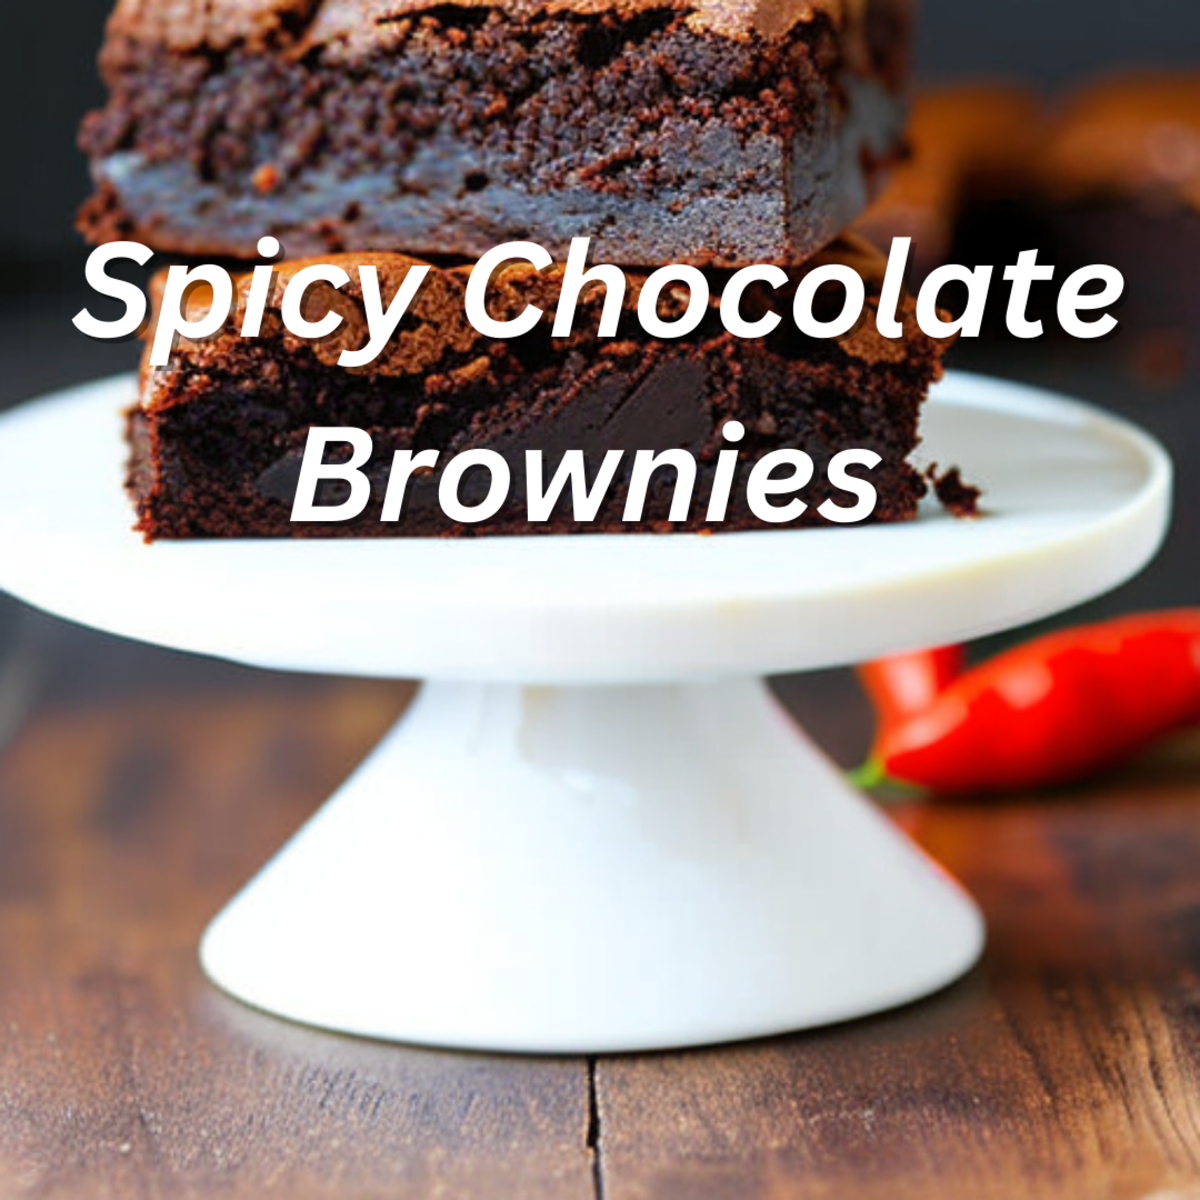 Spicy Chocolate Brownies